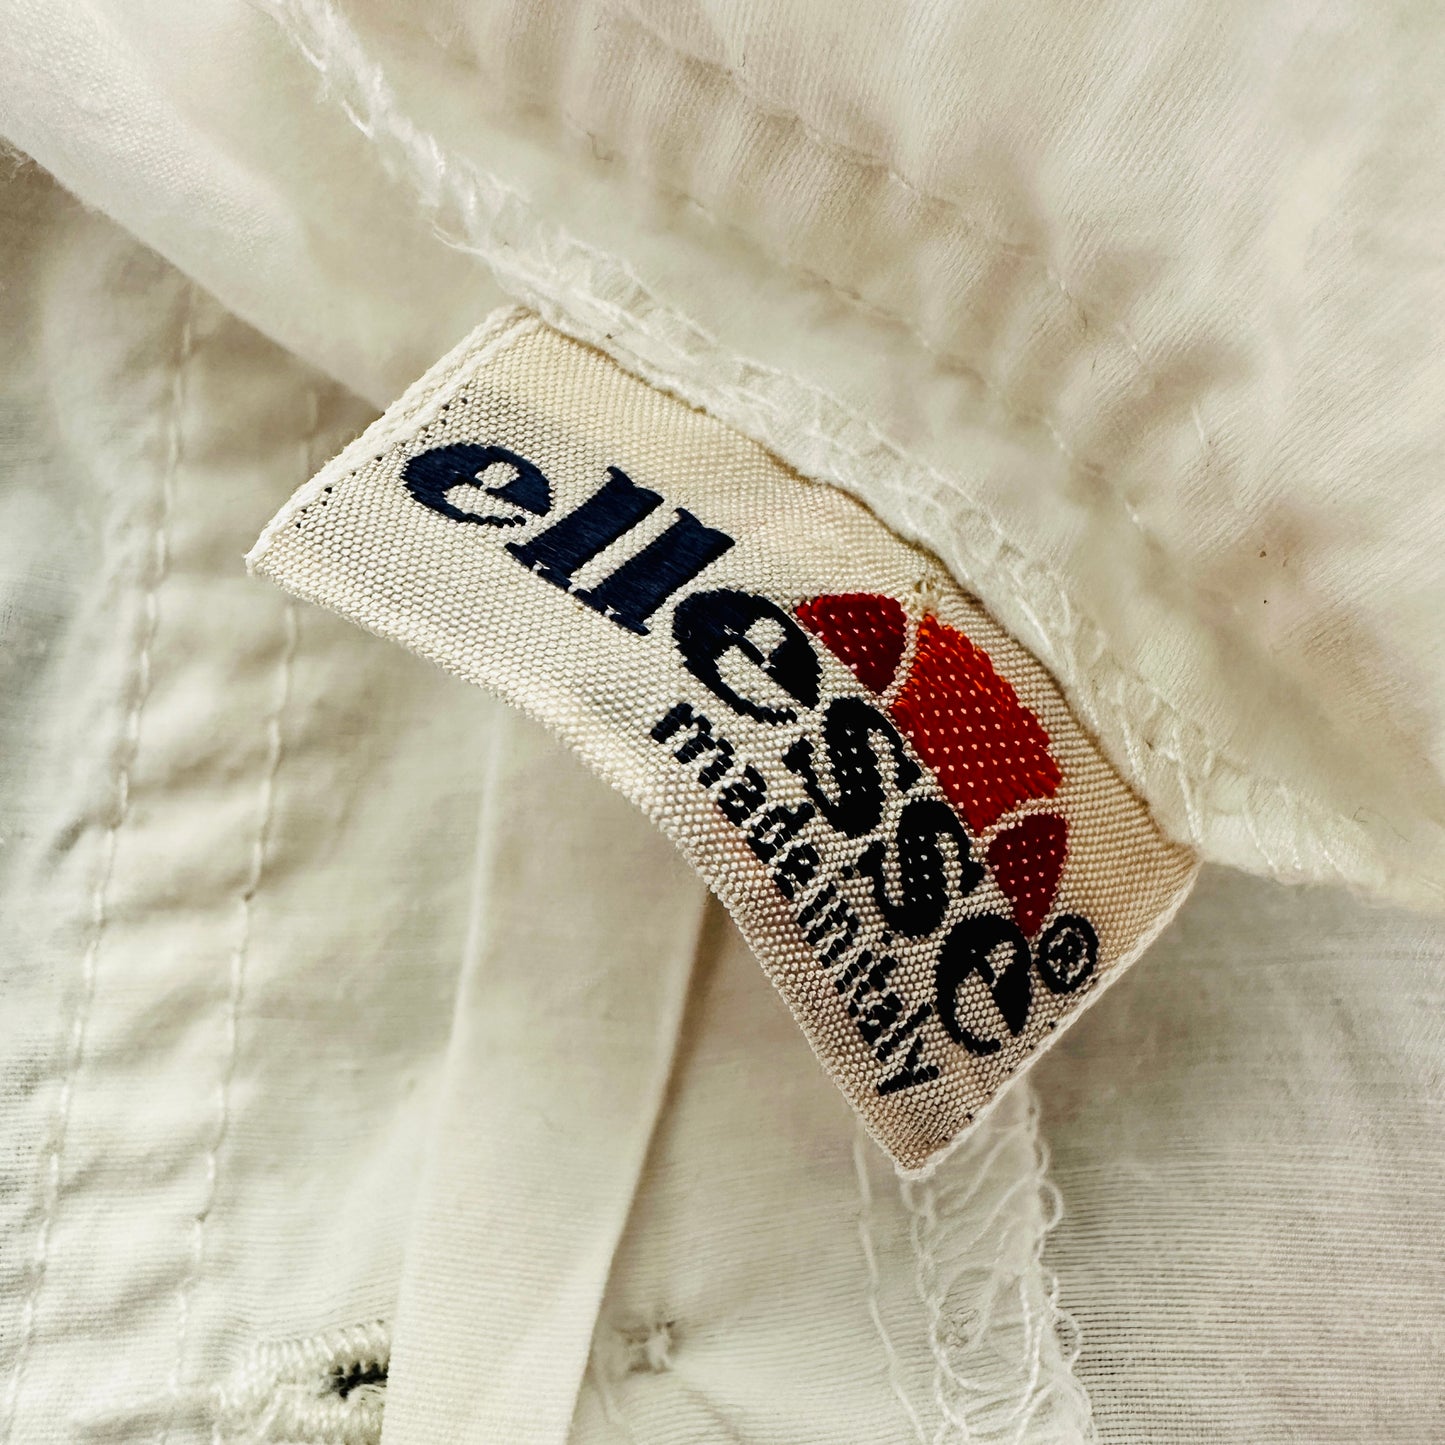 Ellesse 80s Tennis Shorts - 48 / S - Made in Italy